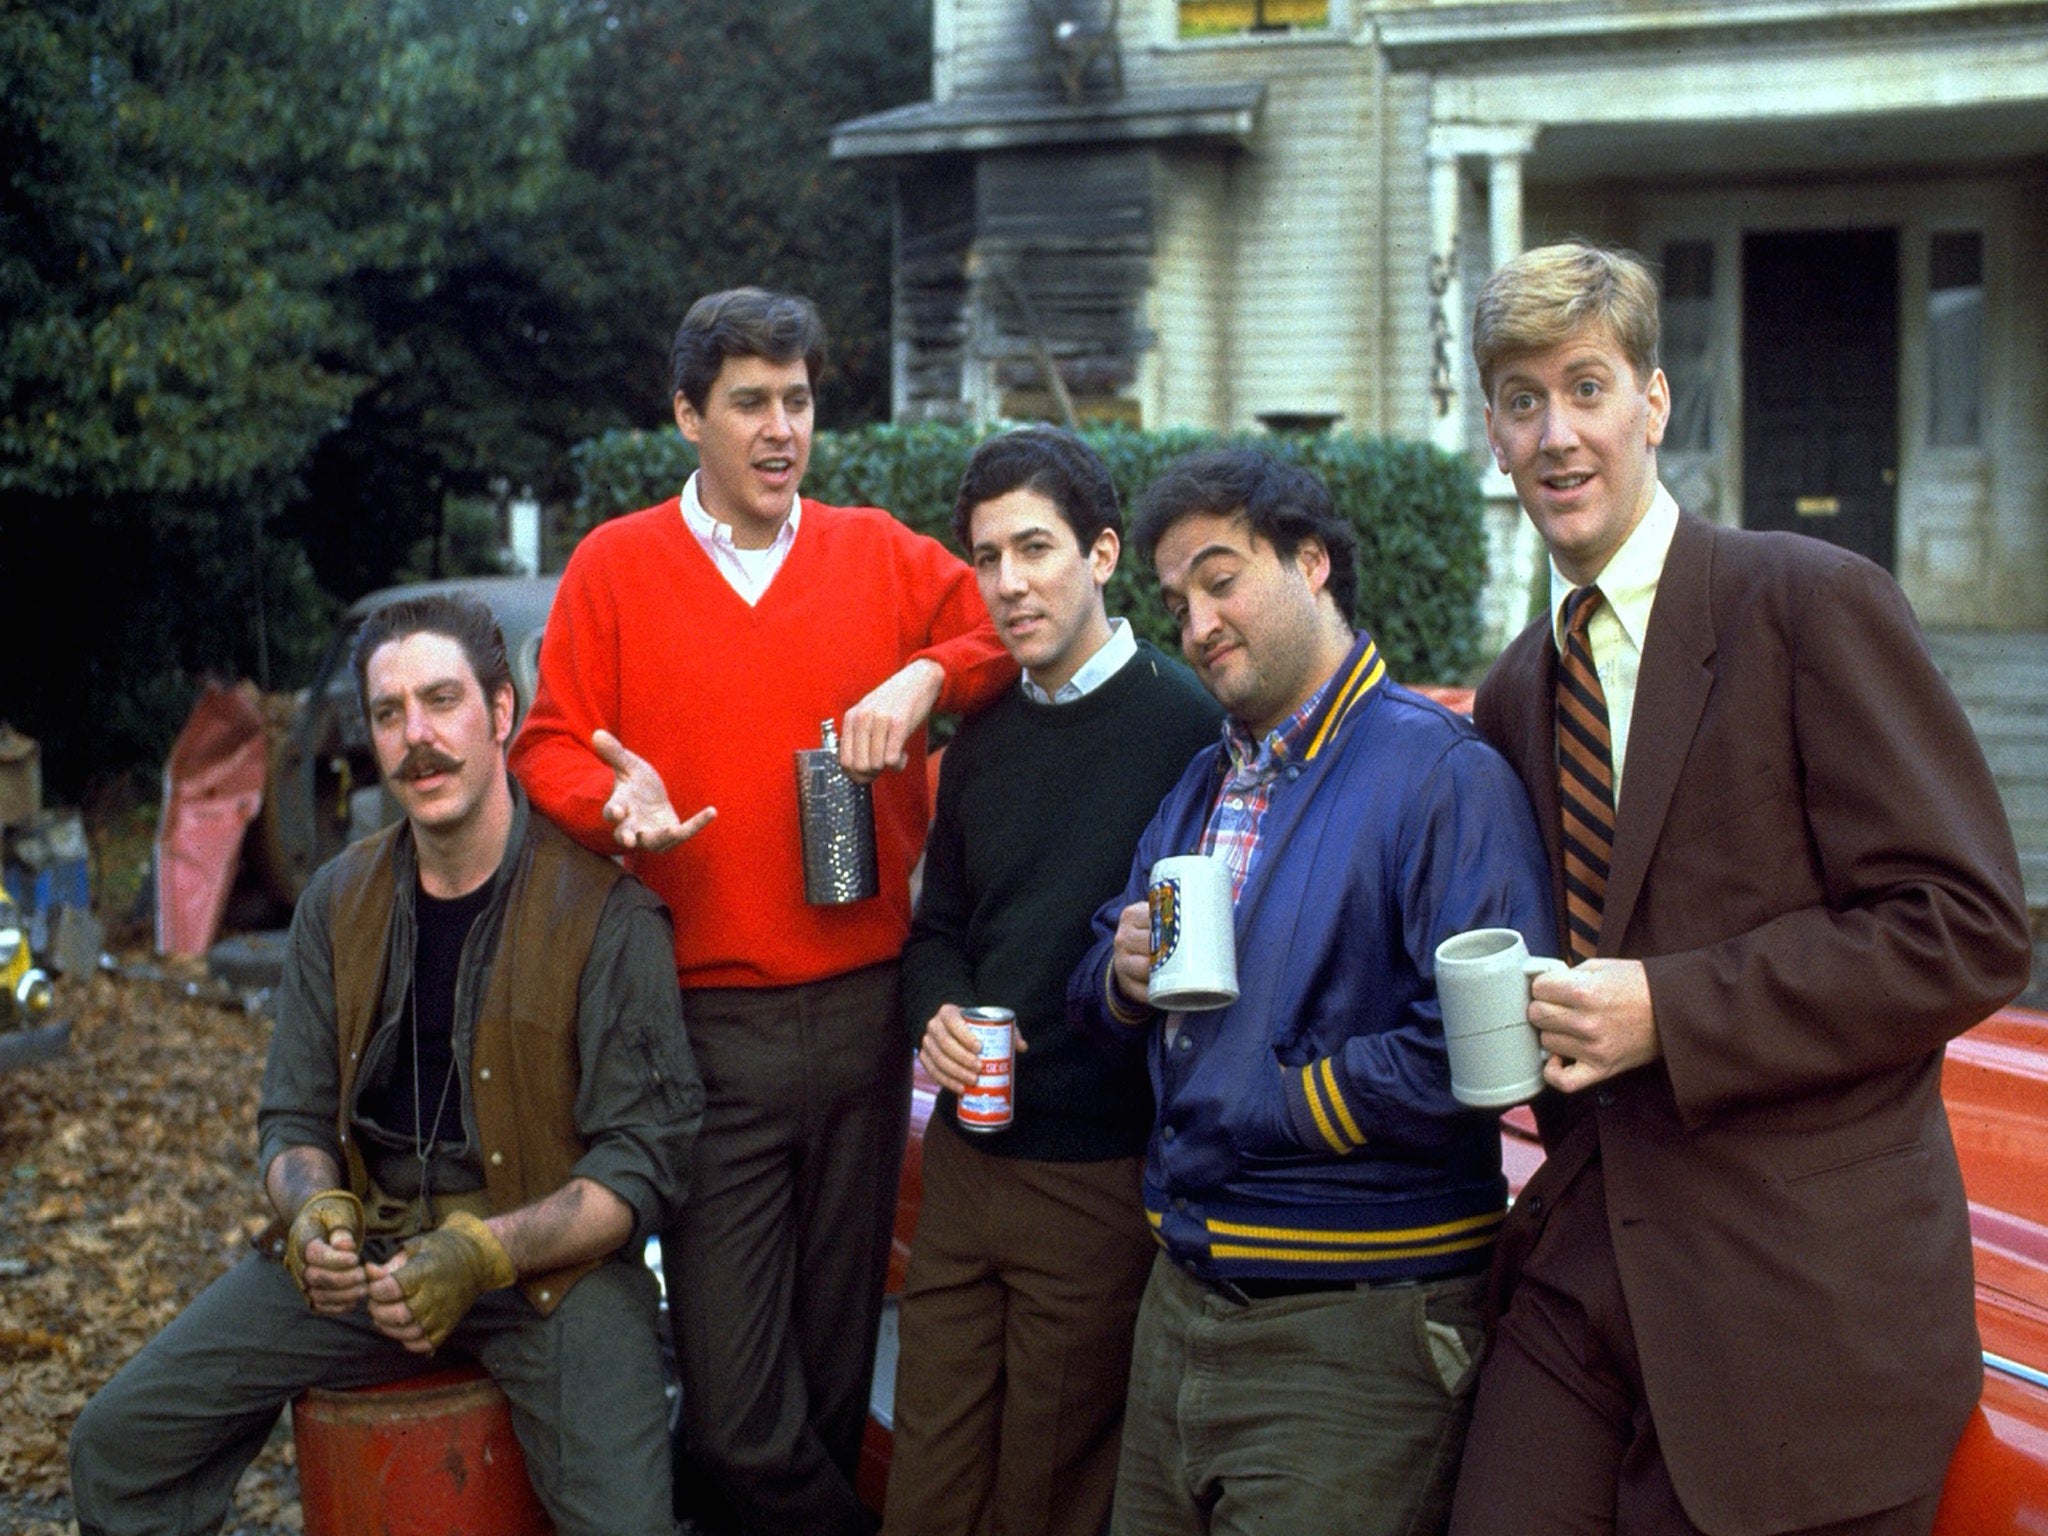 The Alpha Delta fraternity inspired the Animal House movie